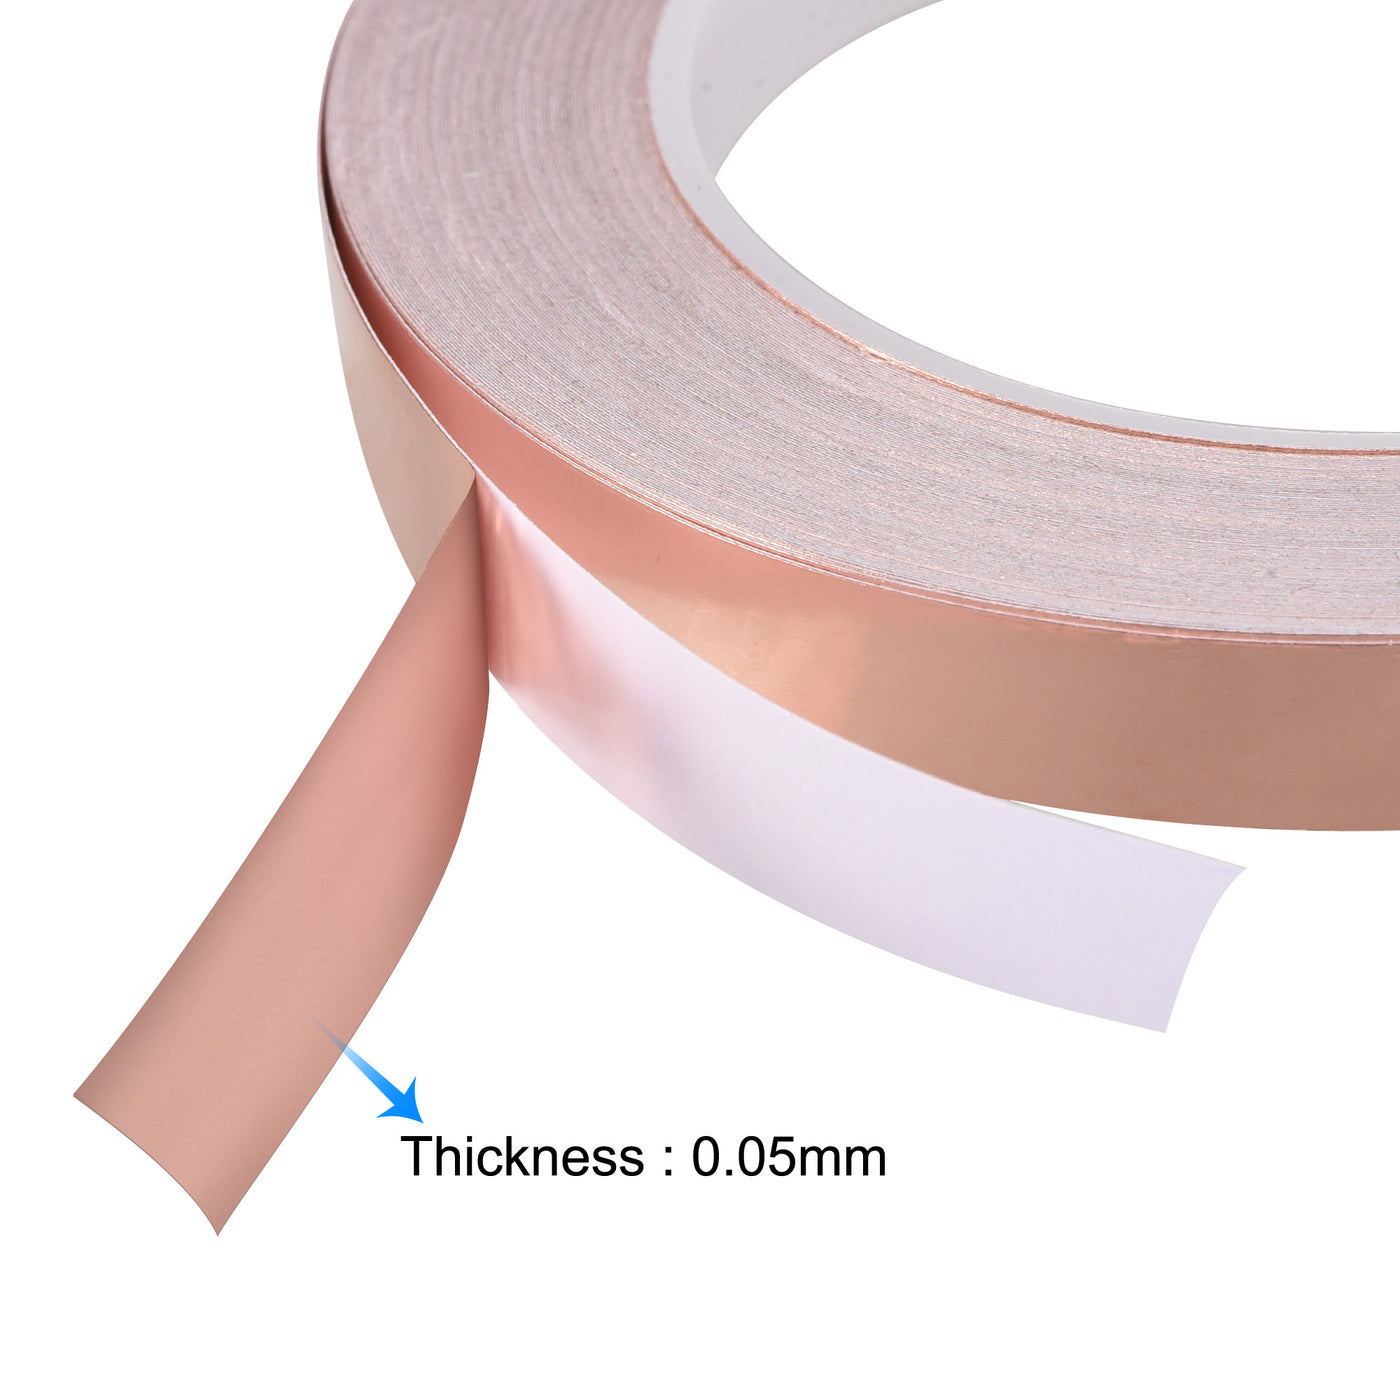 uxcell Uxcell Single-Sided Conductive Tape Copper Foil Tape 12mm x 30m/98.4ft 1pcs